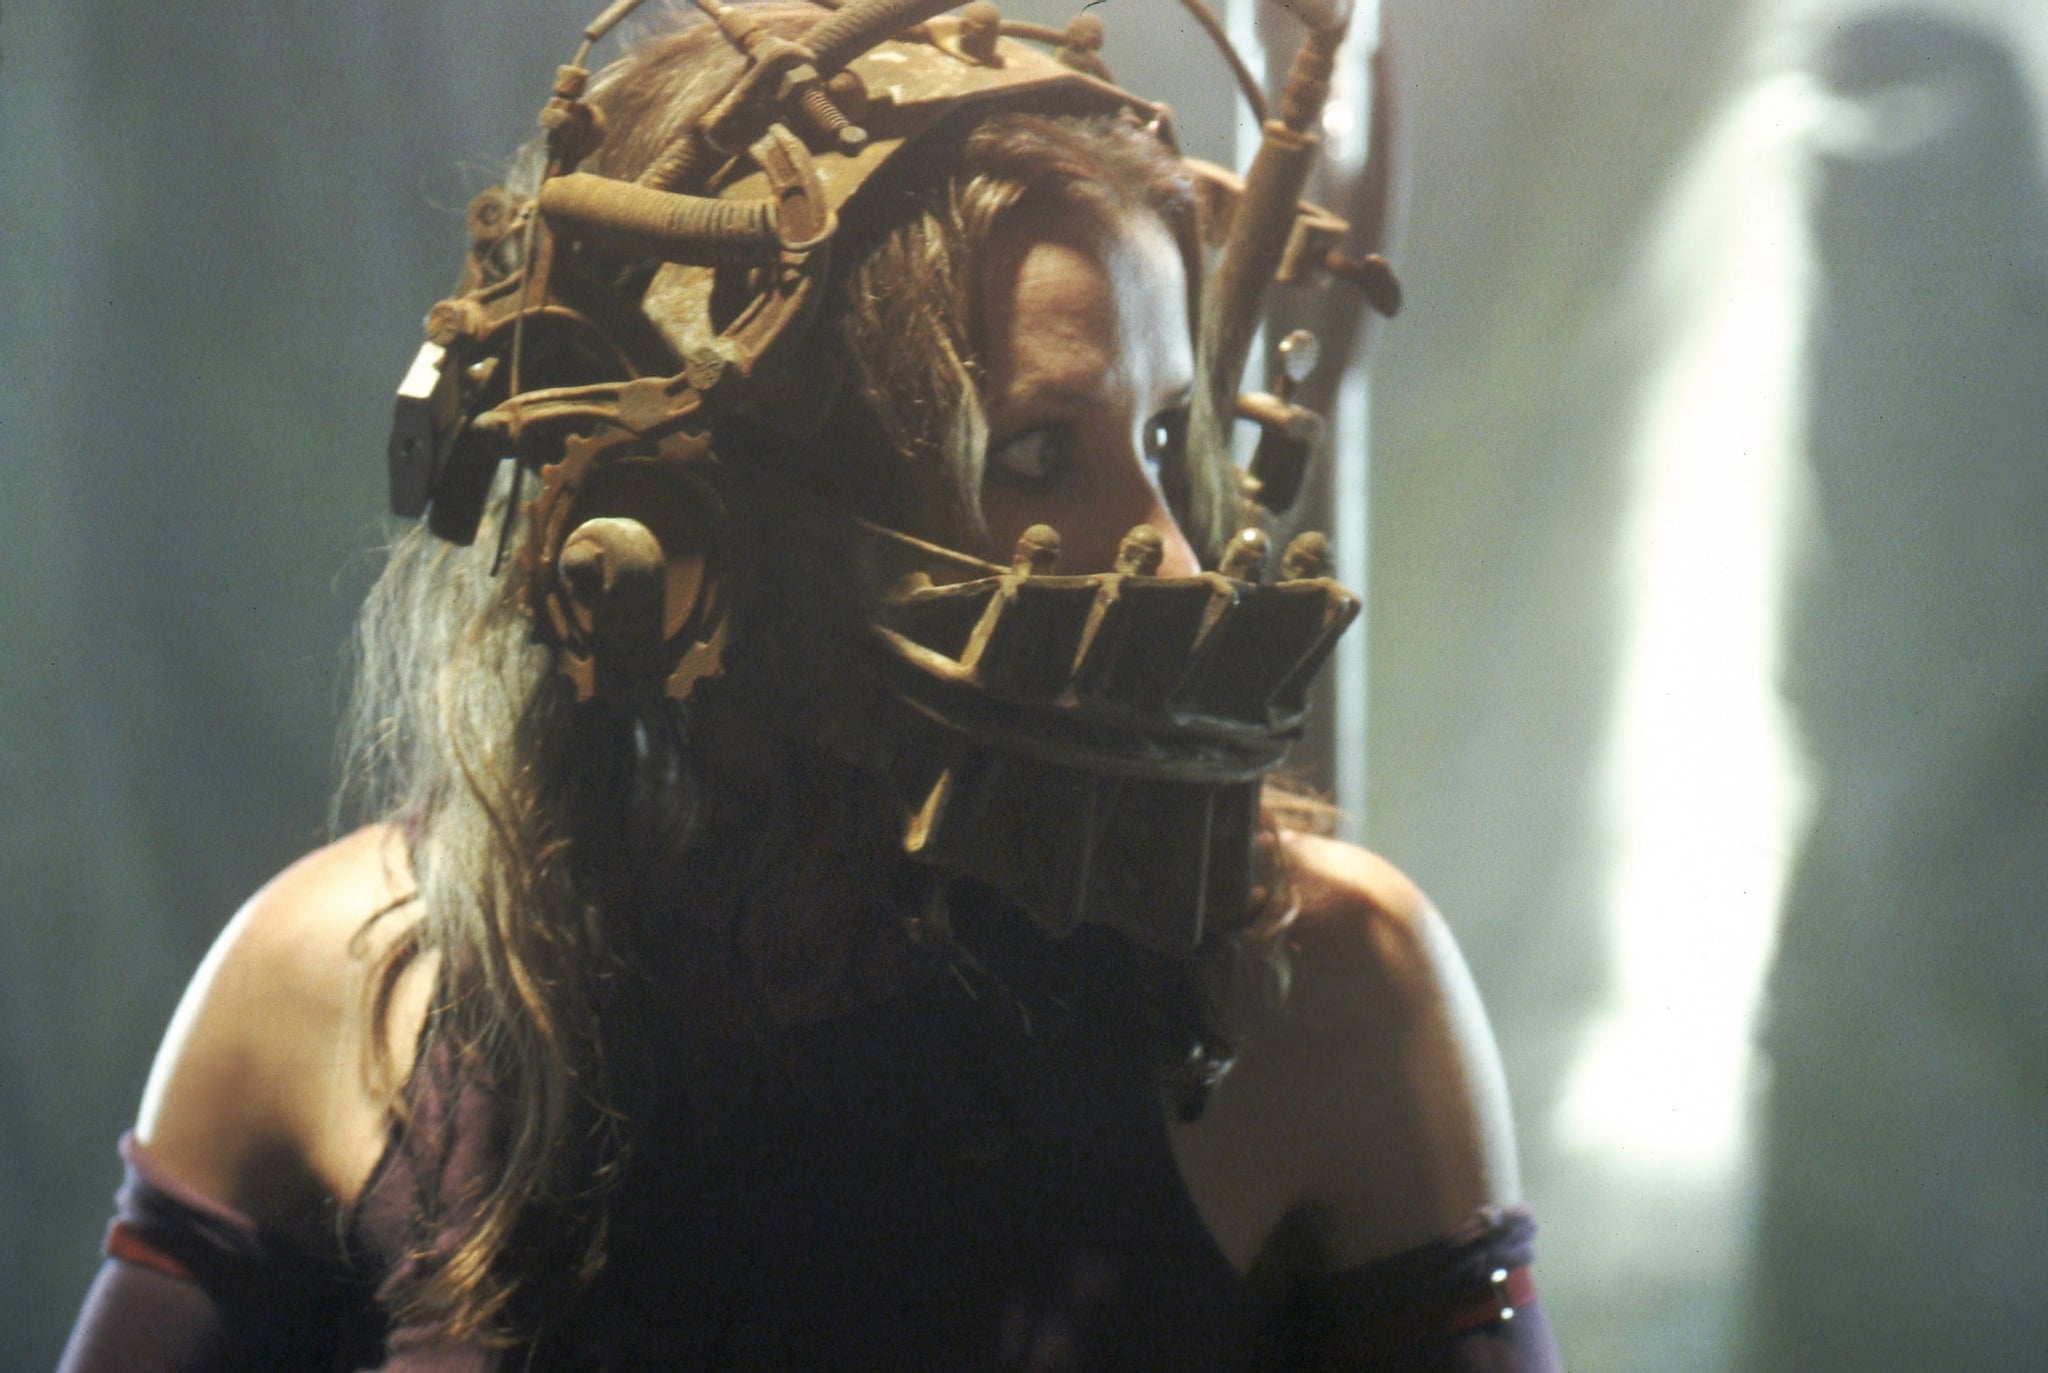 Amanda Young From Saw 45 Horror Movie Halloween Costumes That Will Freak Your Friends Out Popsugar Entertainment Photo 4